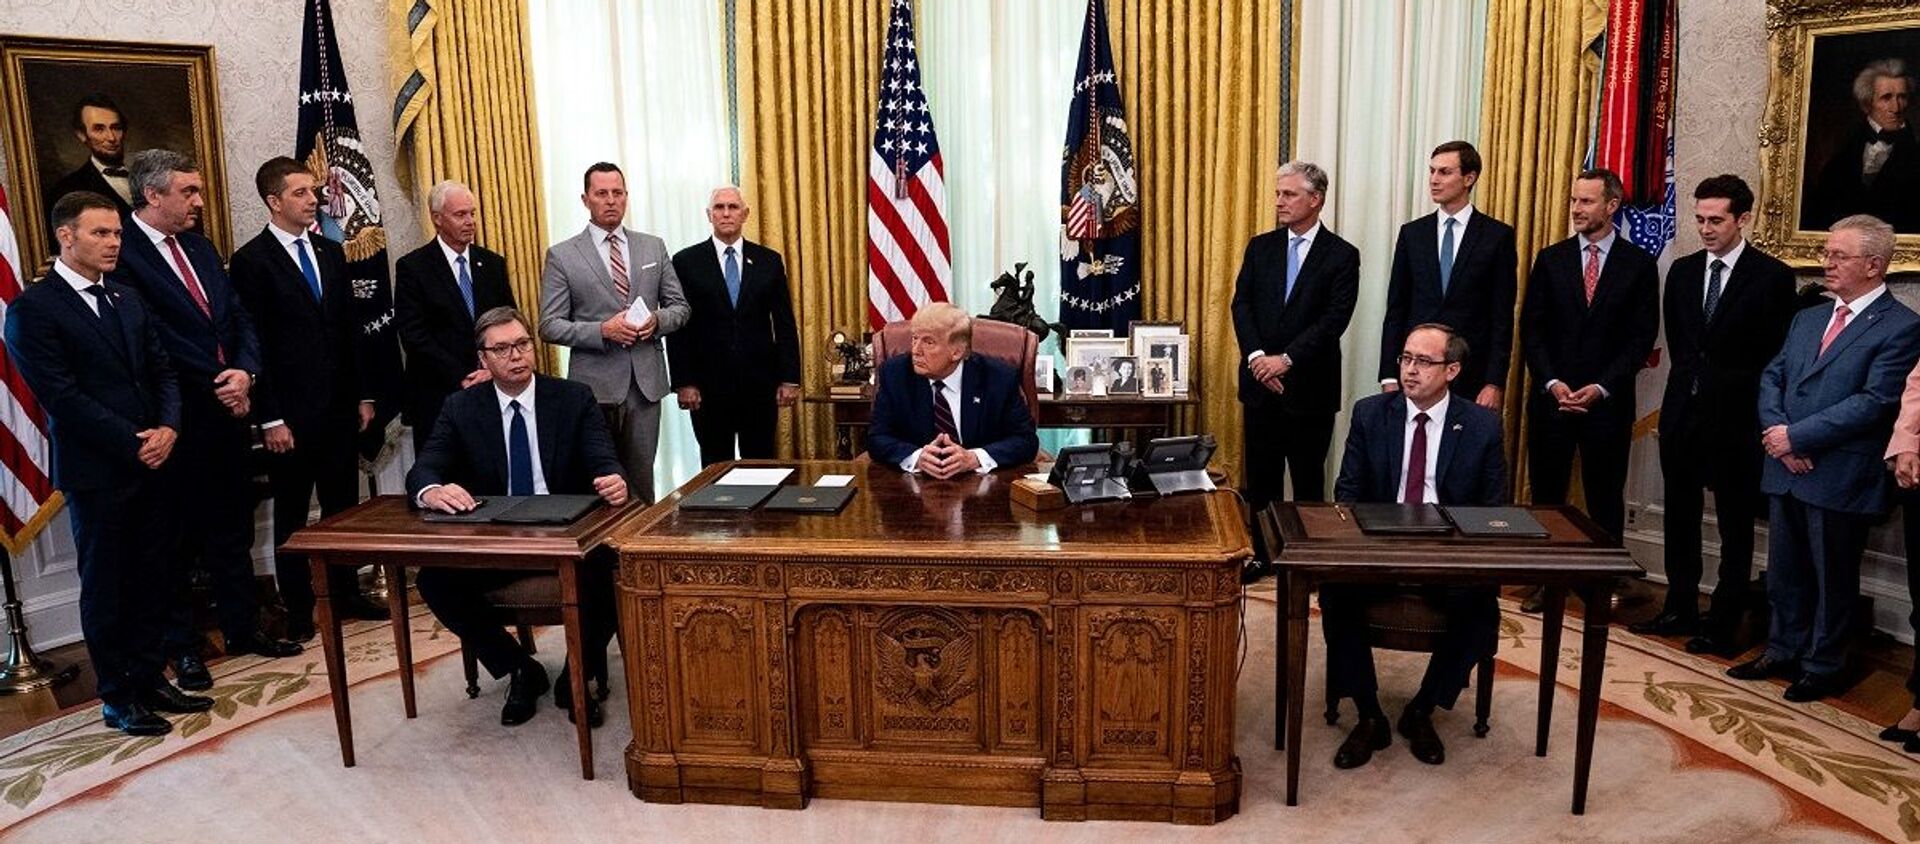 resident Donald Trump (C) participates in a signing ceremony and meeting with the President of Serbia Aleksandar Vucic (L) and the Prime Minister of Kosovo Avdullah Hoti (R) in the Oval Office of the White House on September 4, 2020 in Washington, DC.  - 俄羅斯衛星通訊社, 1920, 05.09.2020